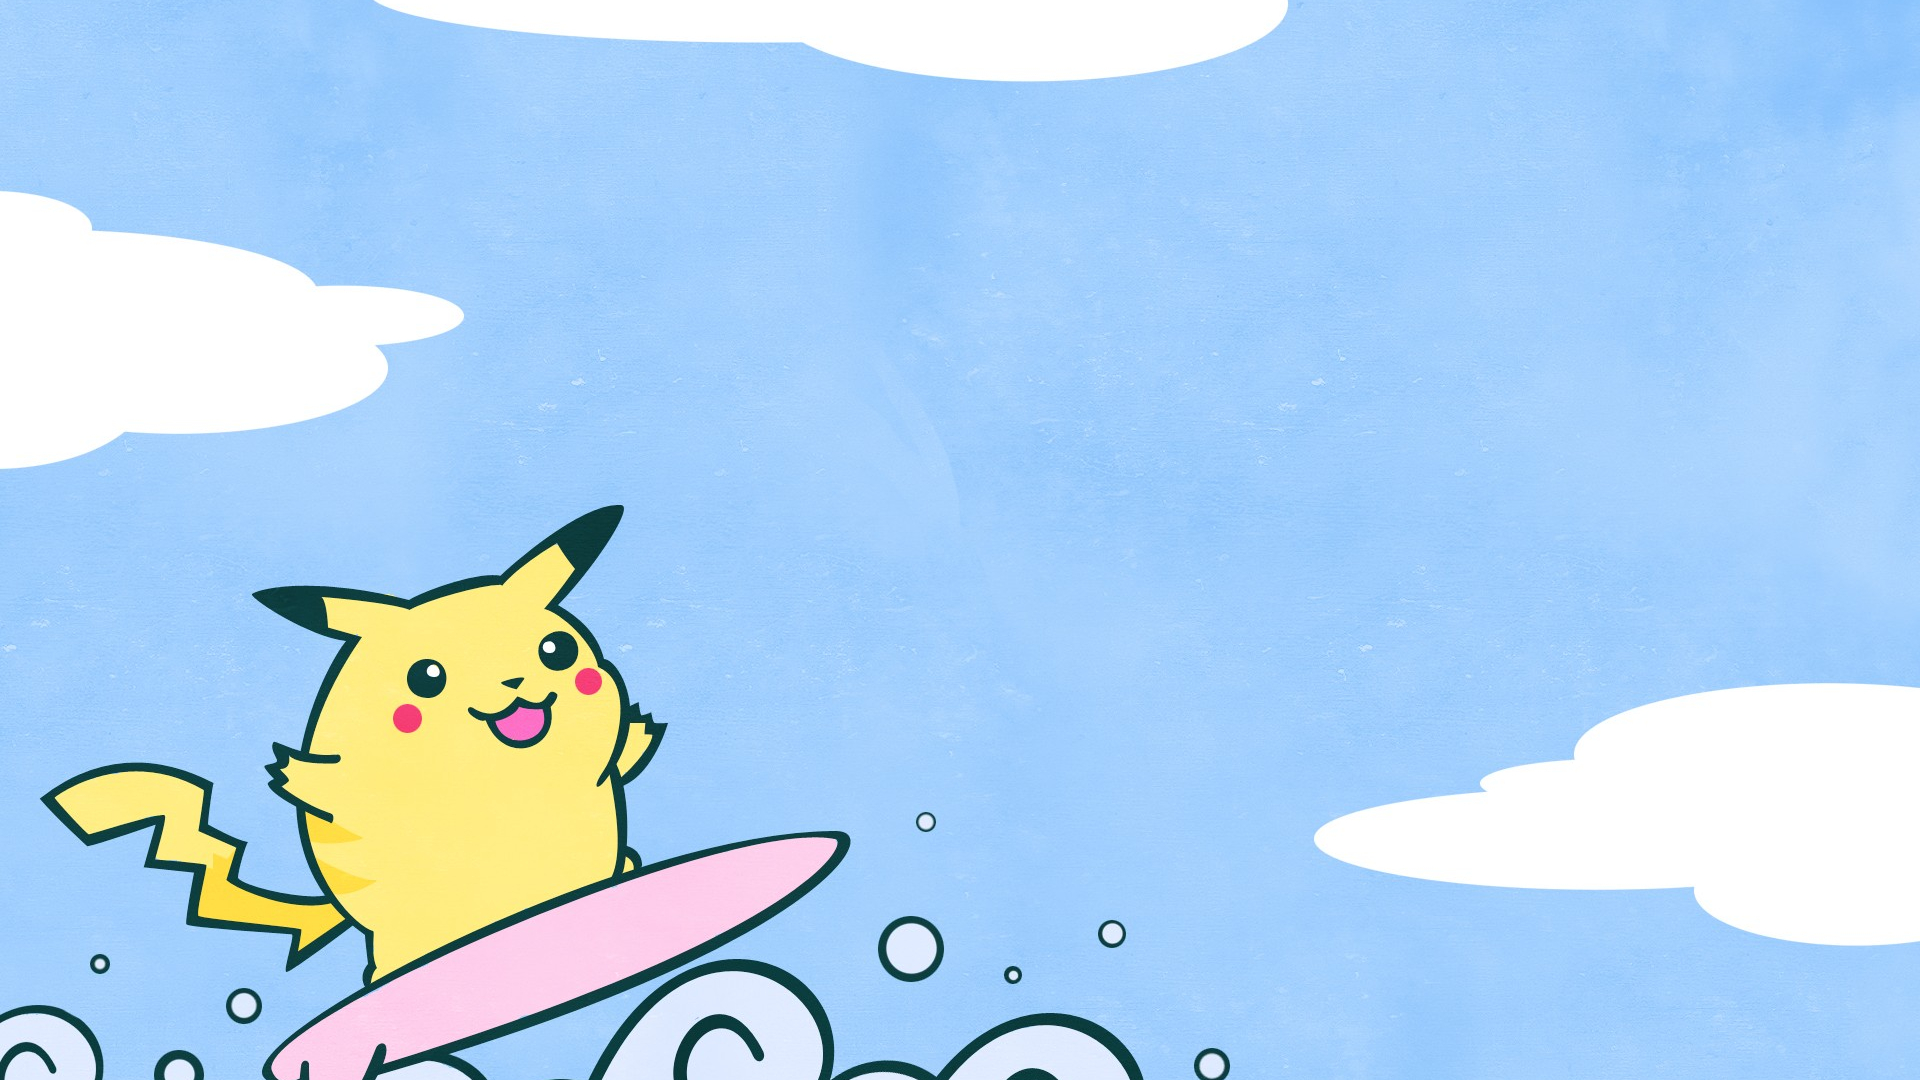 Free download Wallpaper Surfing Pikachu iPhone Wallpaper Surfing Pikachu Android [1920x1200] for your Desktop, Mobile & Tablet. Explore Cute Pokemon Wallpaper for Android. Awesome Charizard Wallpaper, Kawaii Pokemon Wallpaper